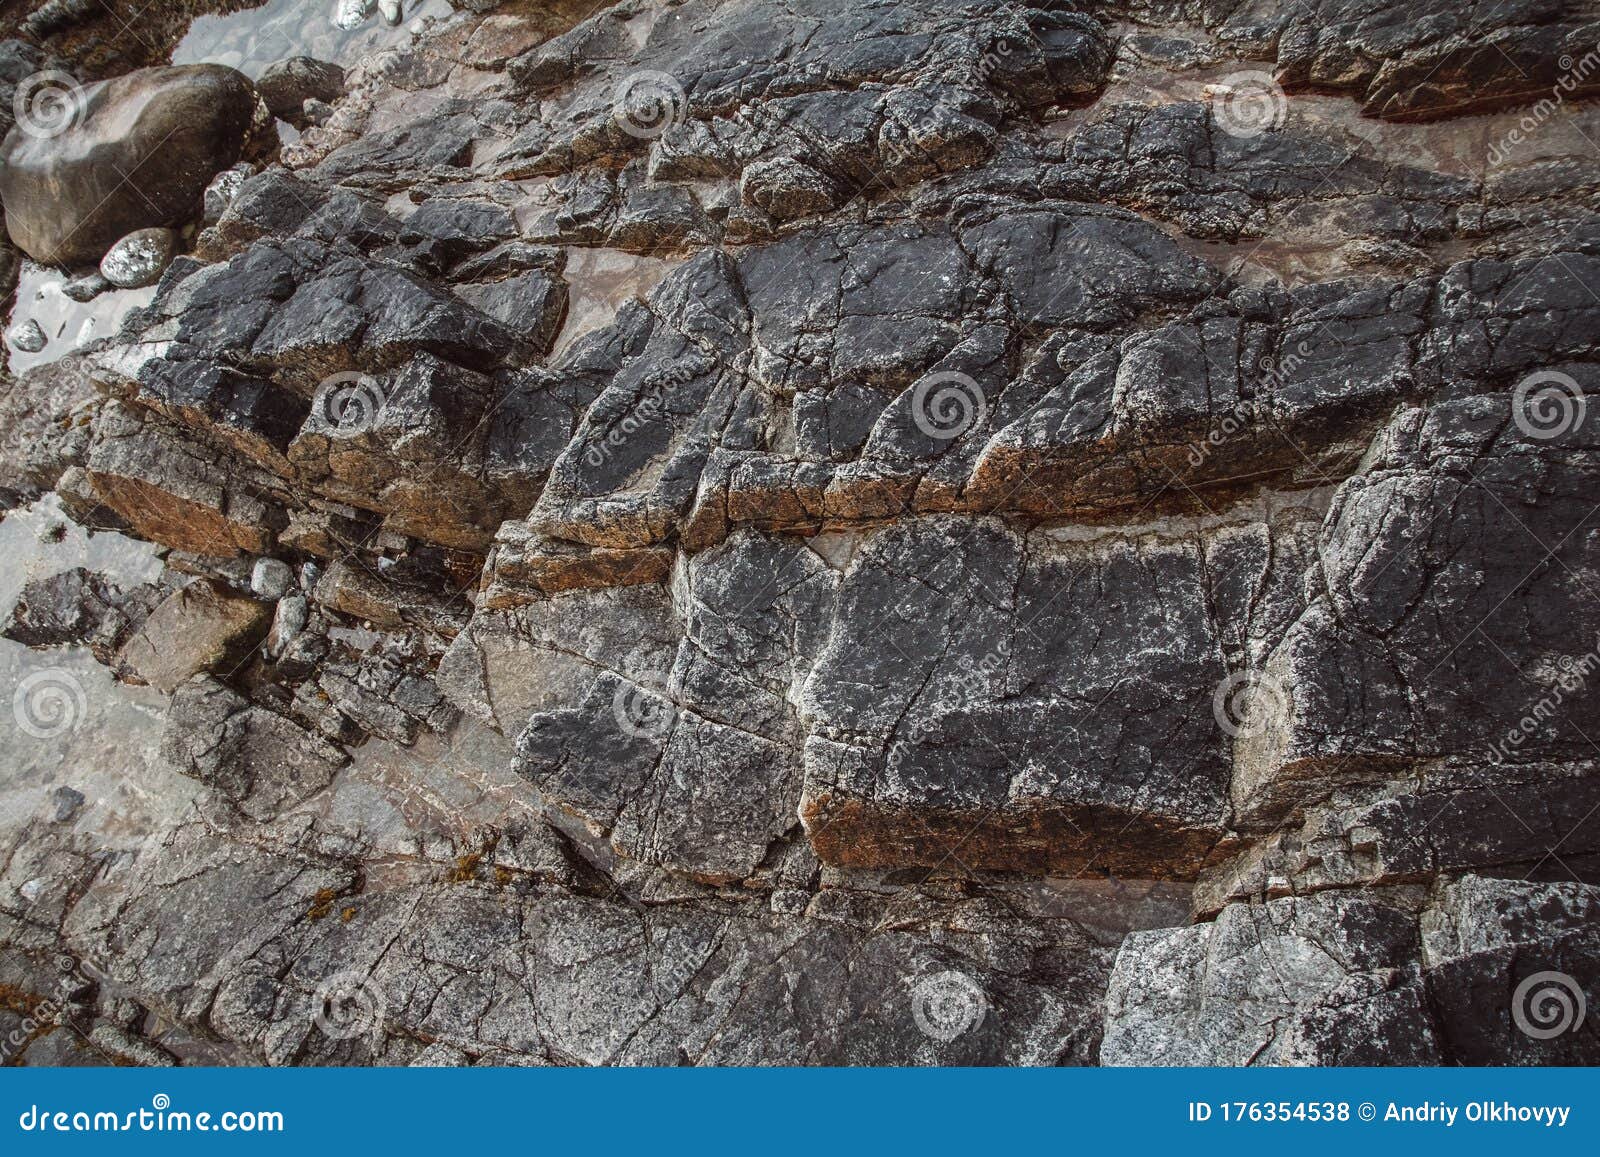 stone texture from waves erode, nature background. top view. copy space. can use as banner